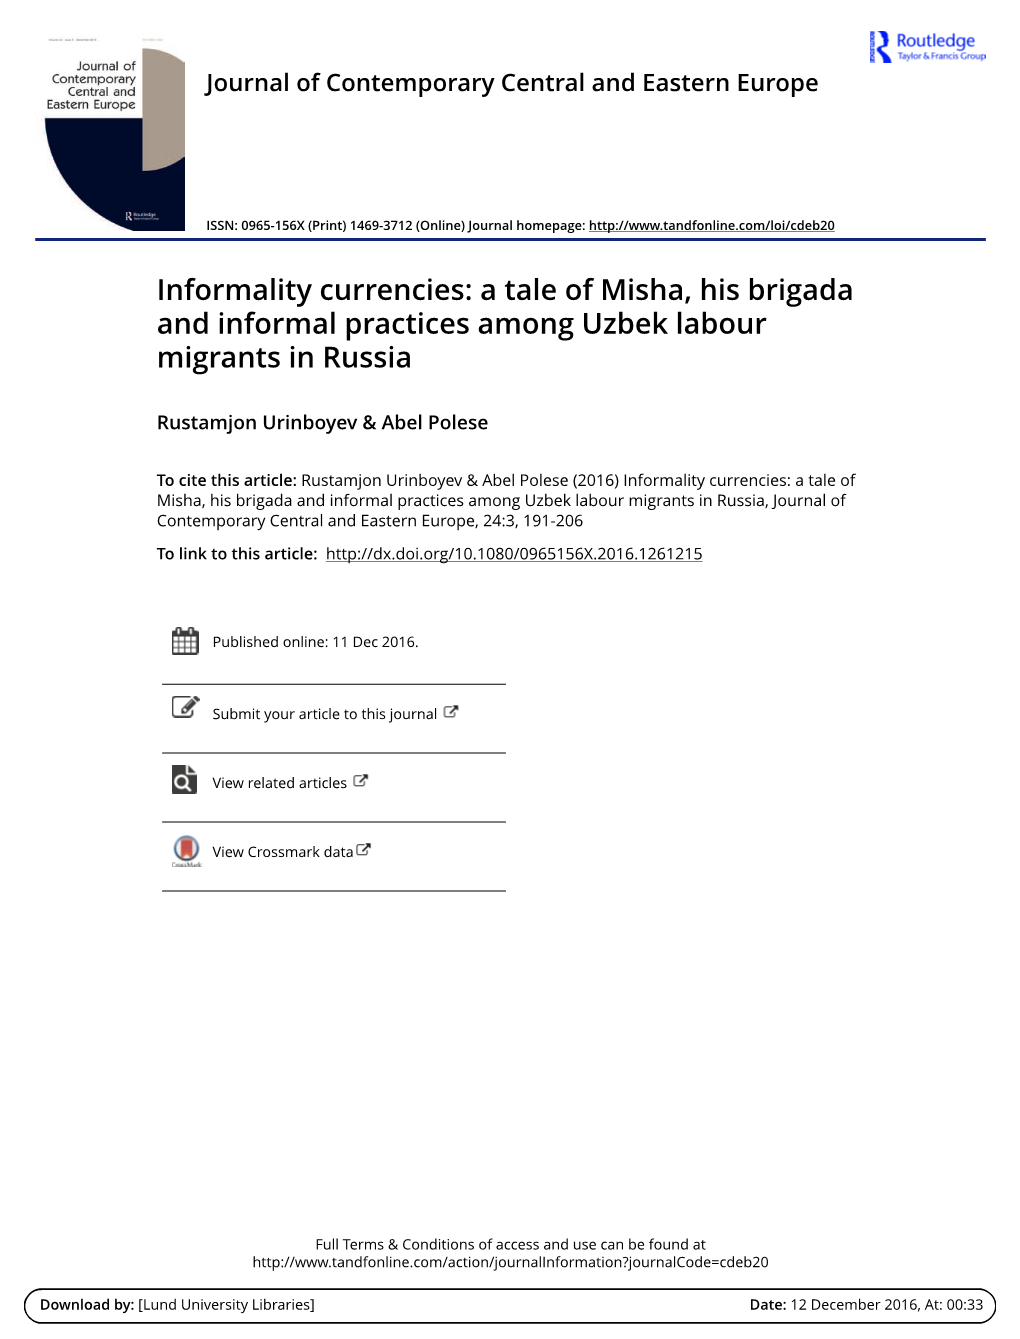 A Tale of Misha, His Brigada and Informal Practices Among Uzbek Labour Migrants in Russia